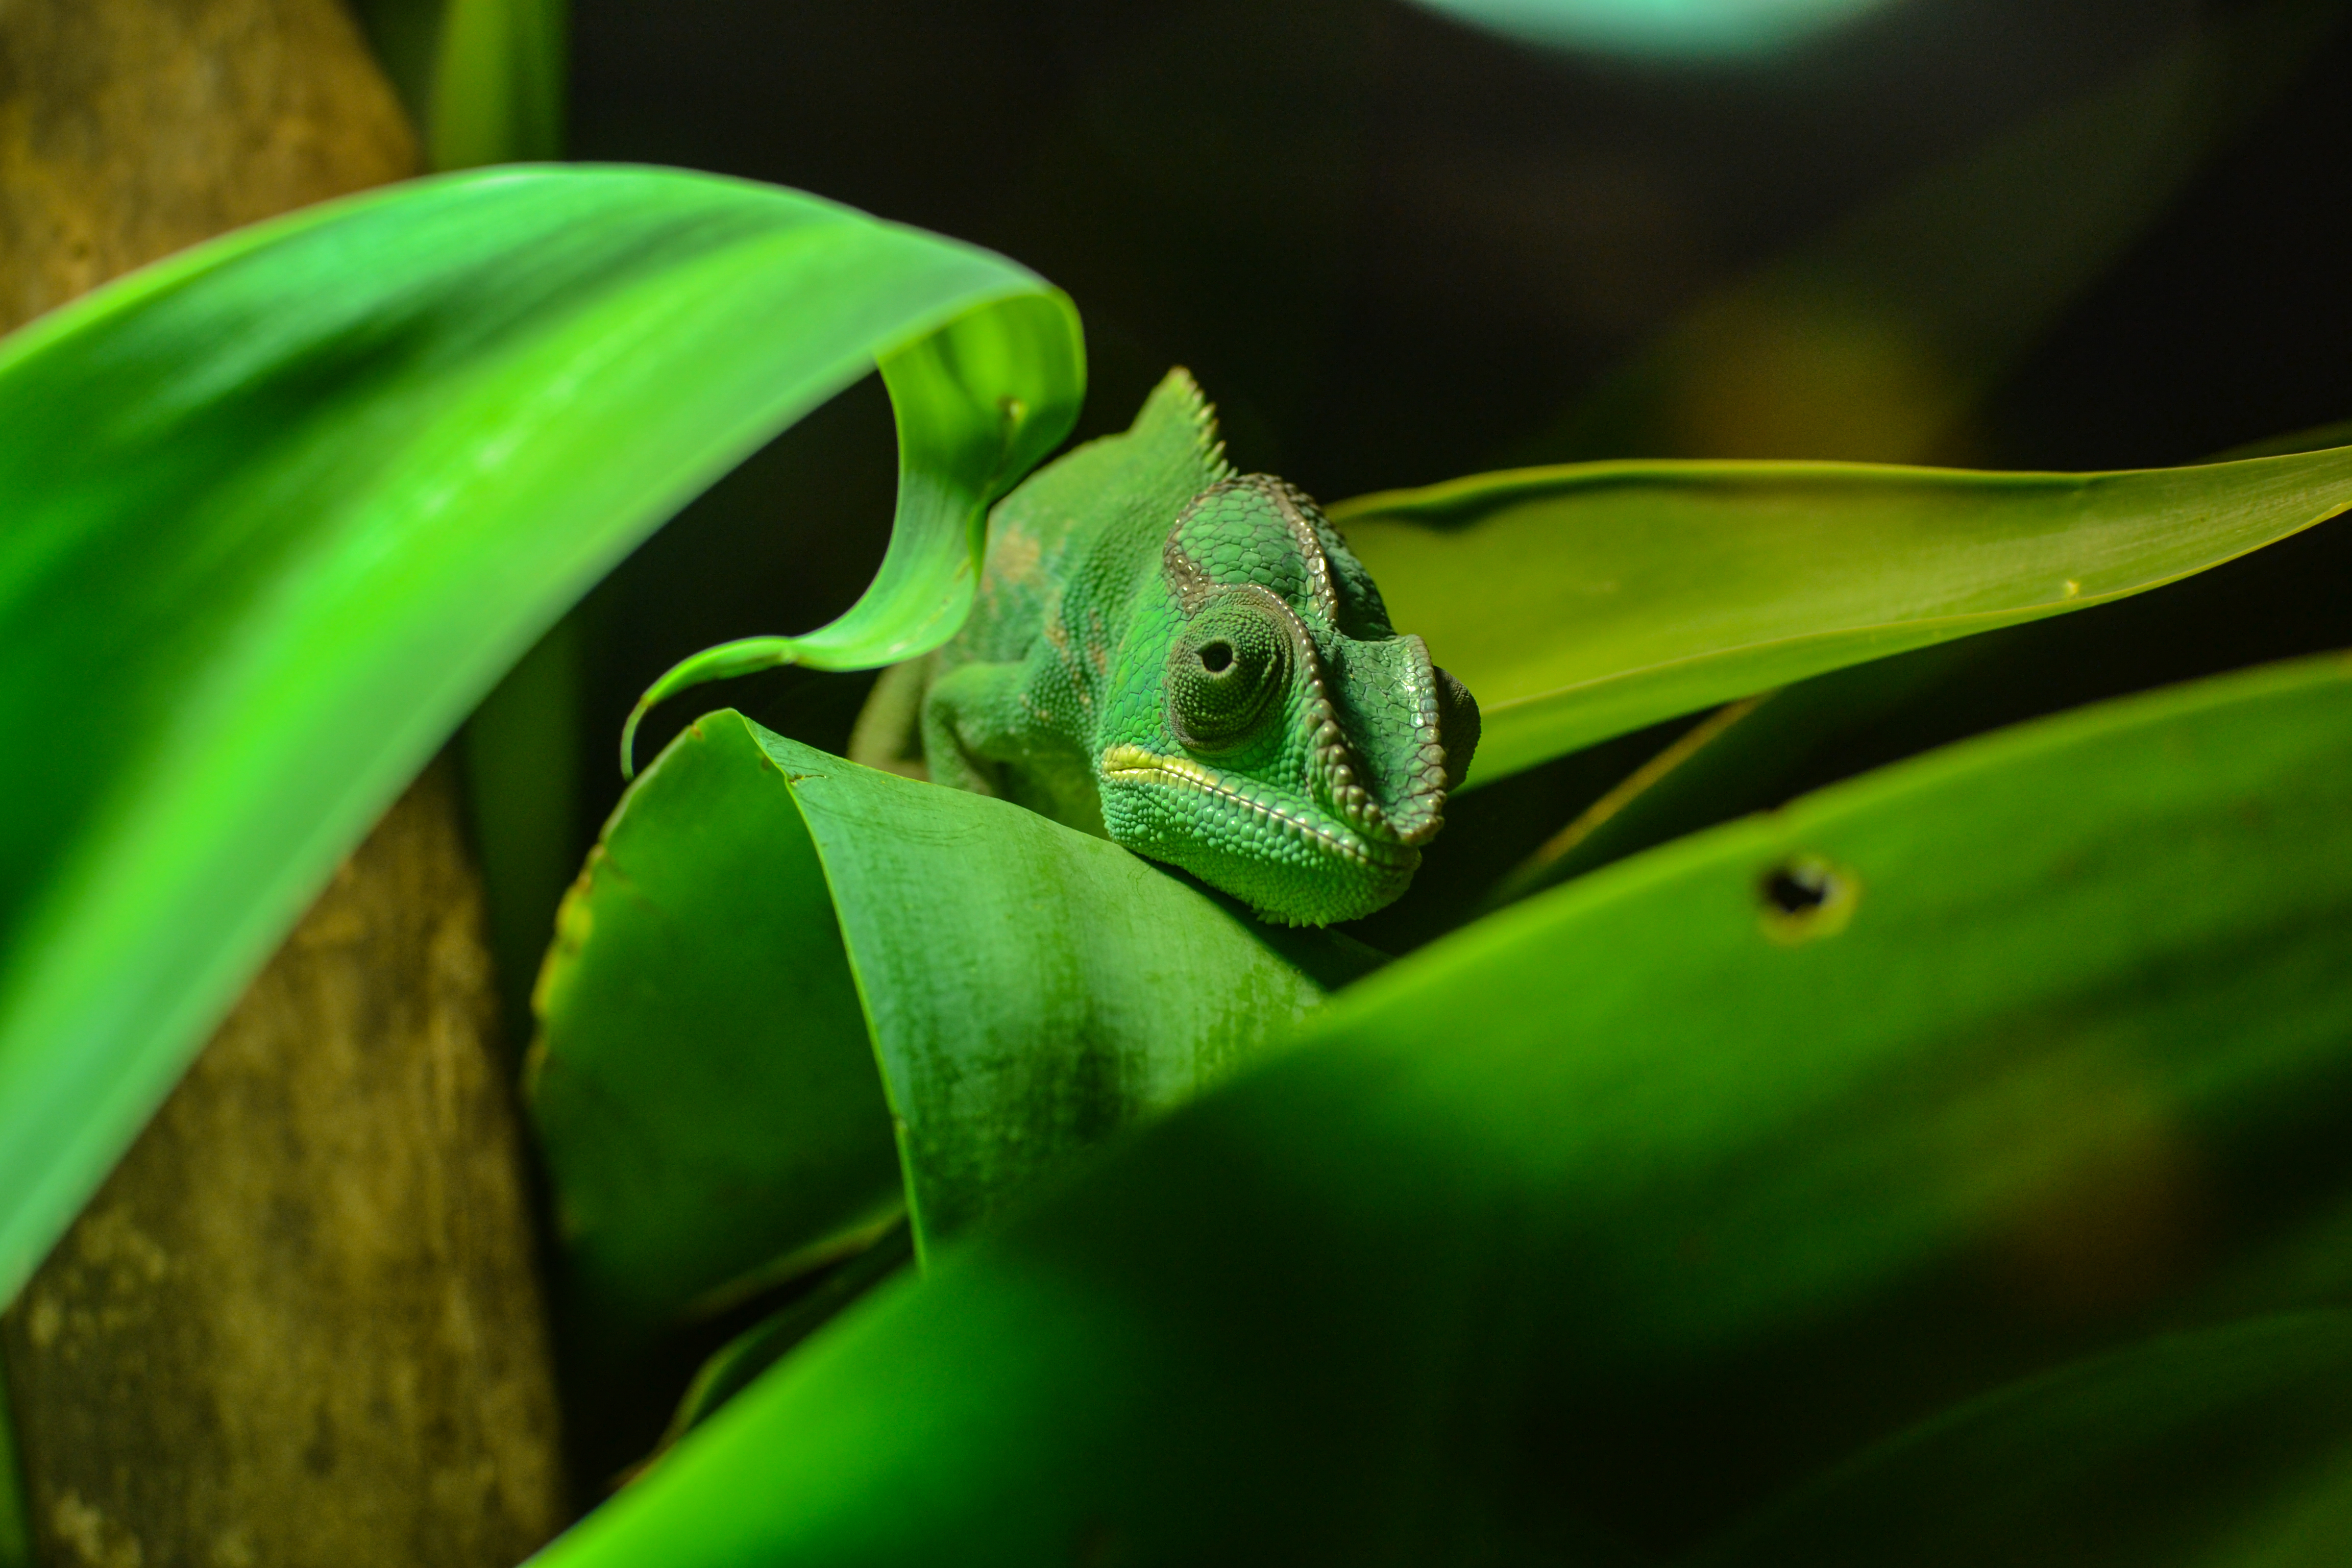 92762 download wallpaper animals, color, foliage, reptile, disguise, camouflage, chameleon screensavers and pictures for free